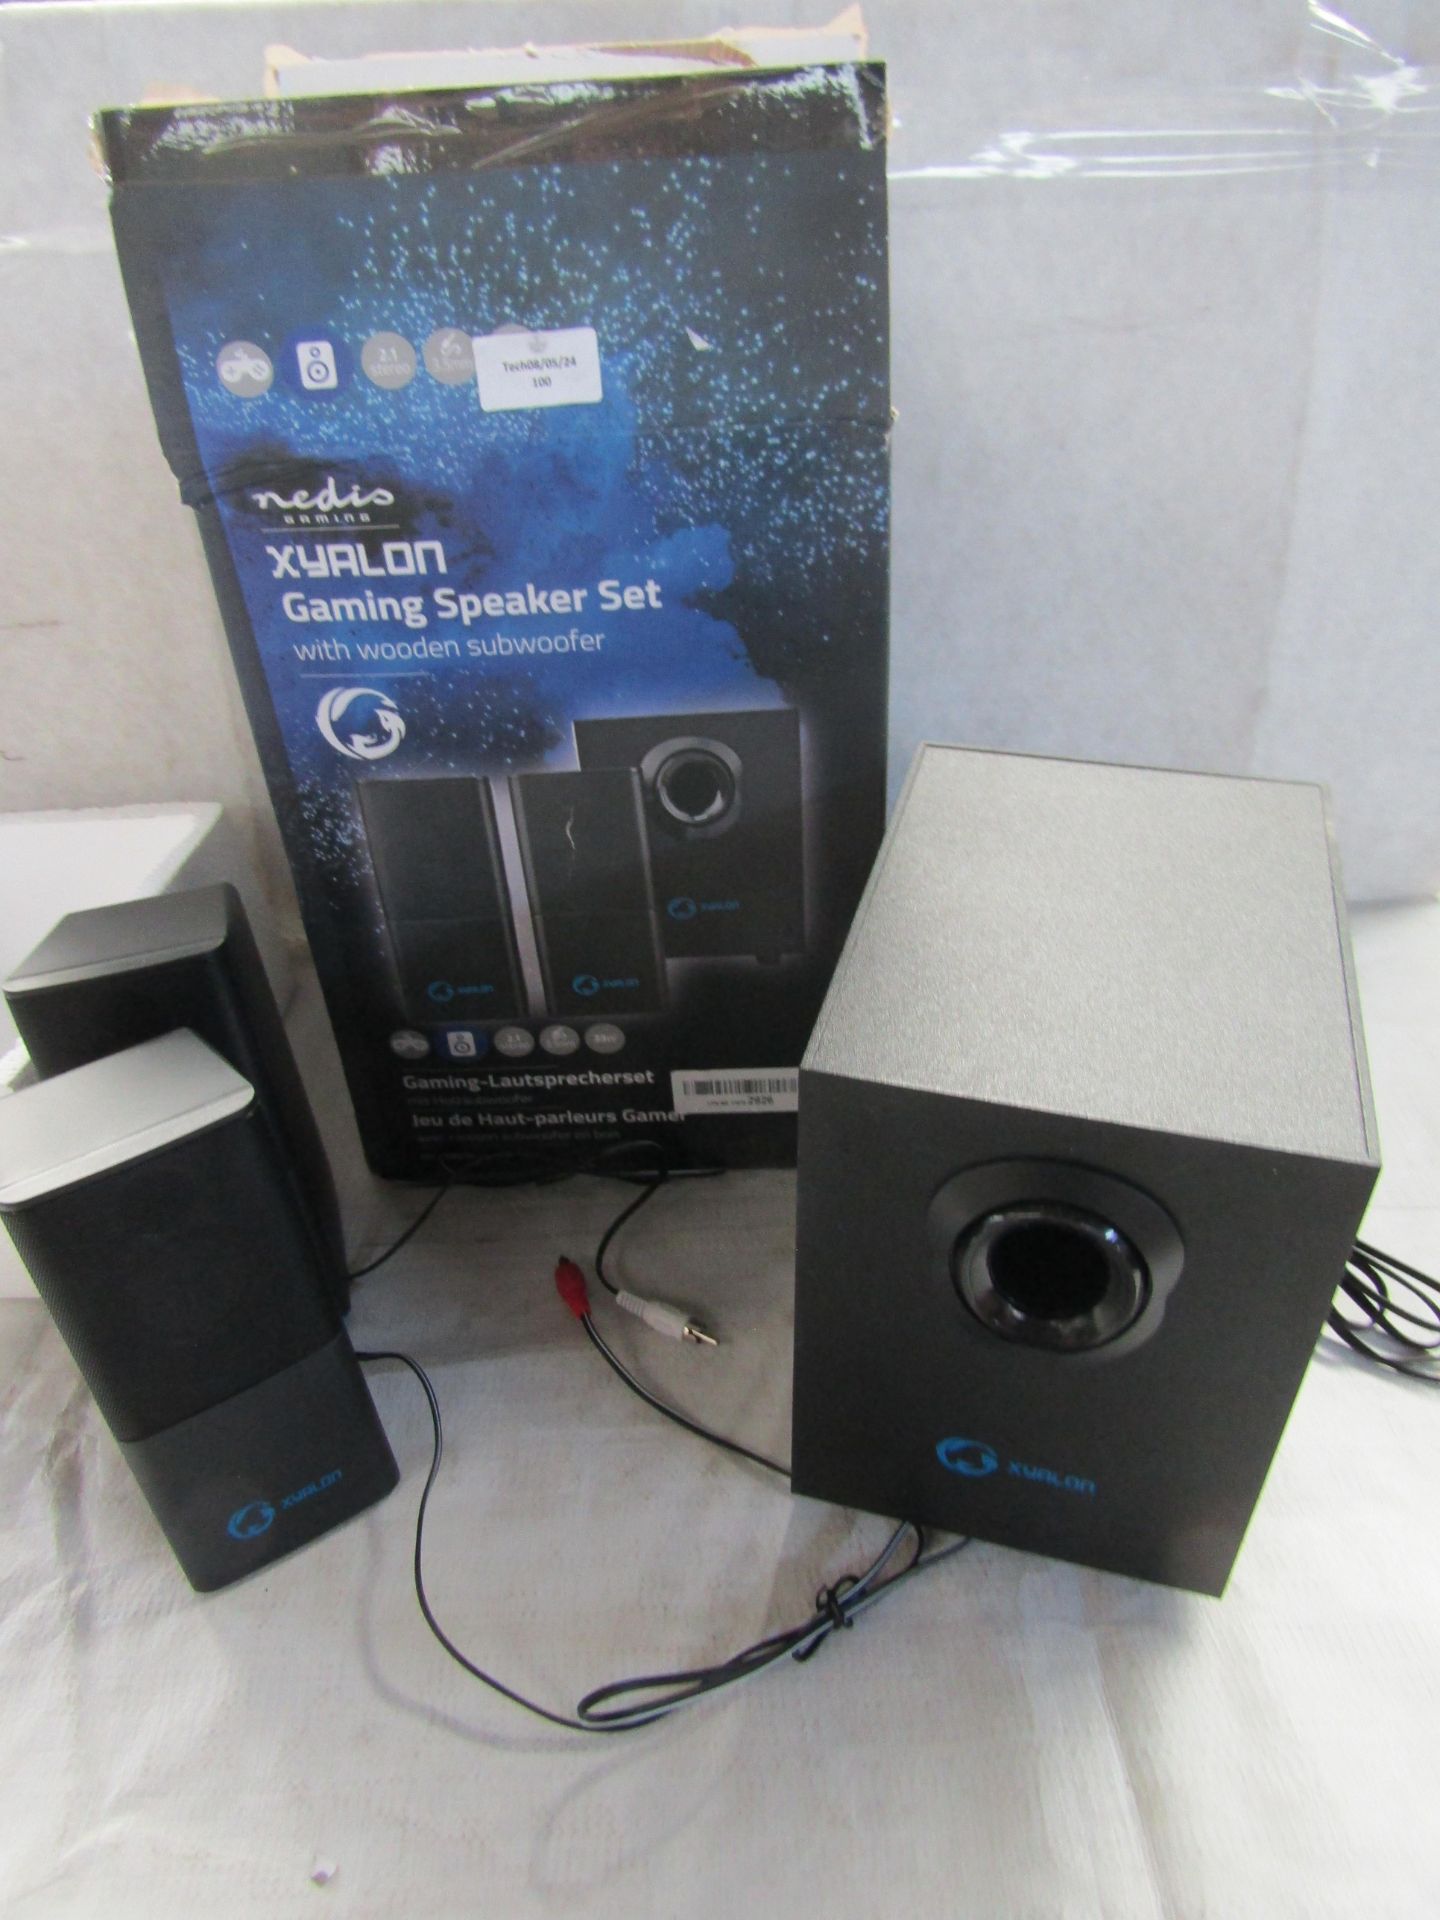 Nedis Gaming Xyalon Gaming Speaker Set, All Parts Present However Untested & Boxed, RRP £ 29